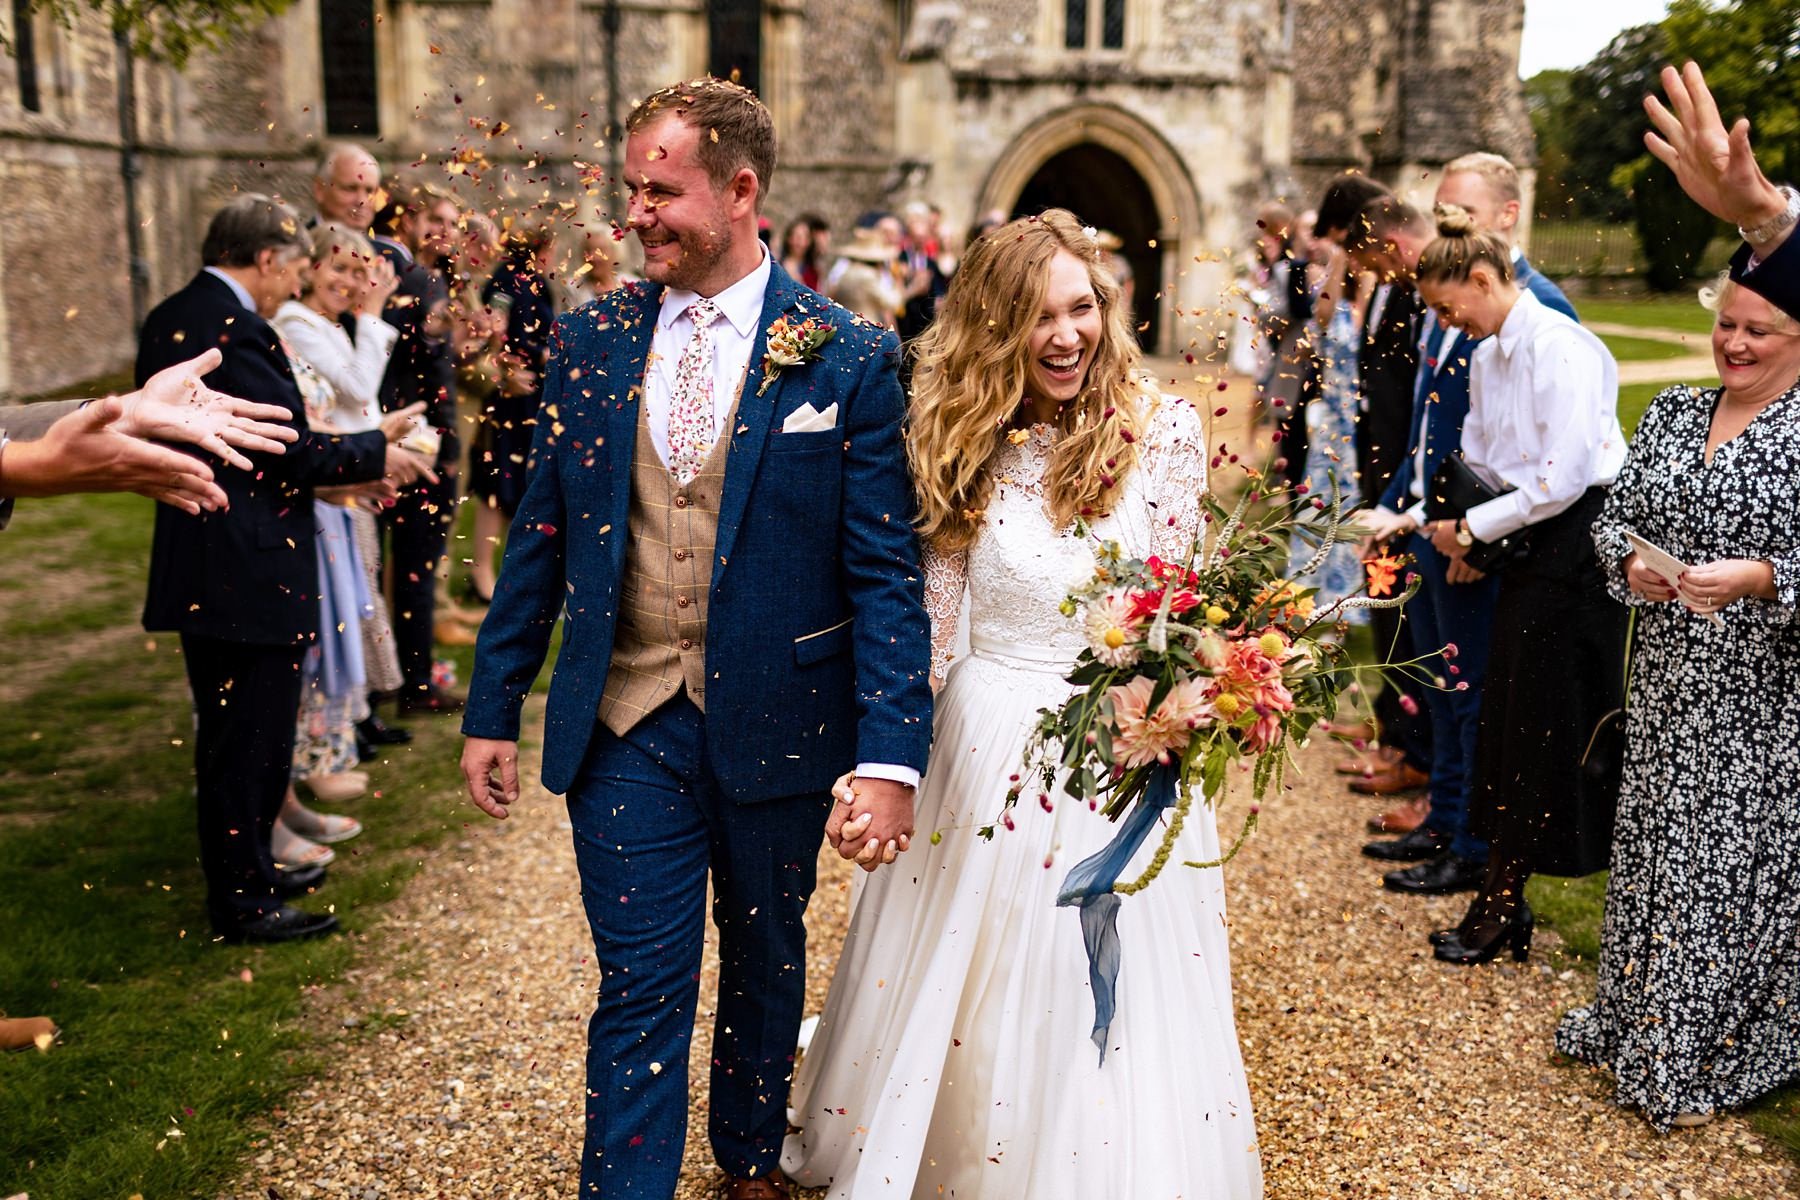 A bride and groom have confetti thrown over them as they leave their wedding